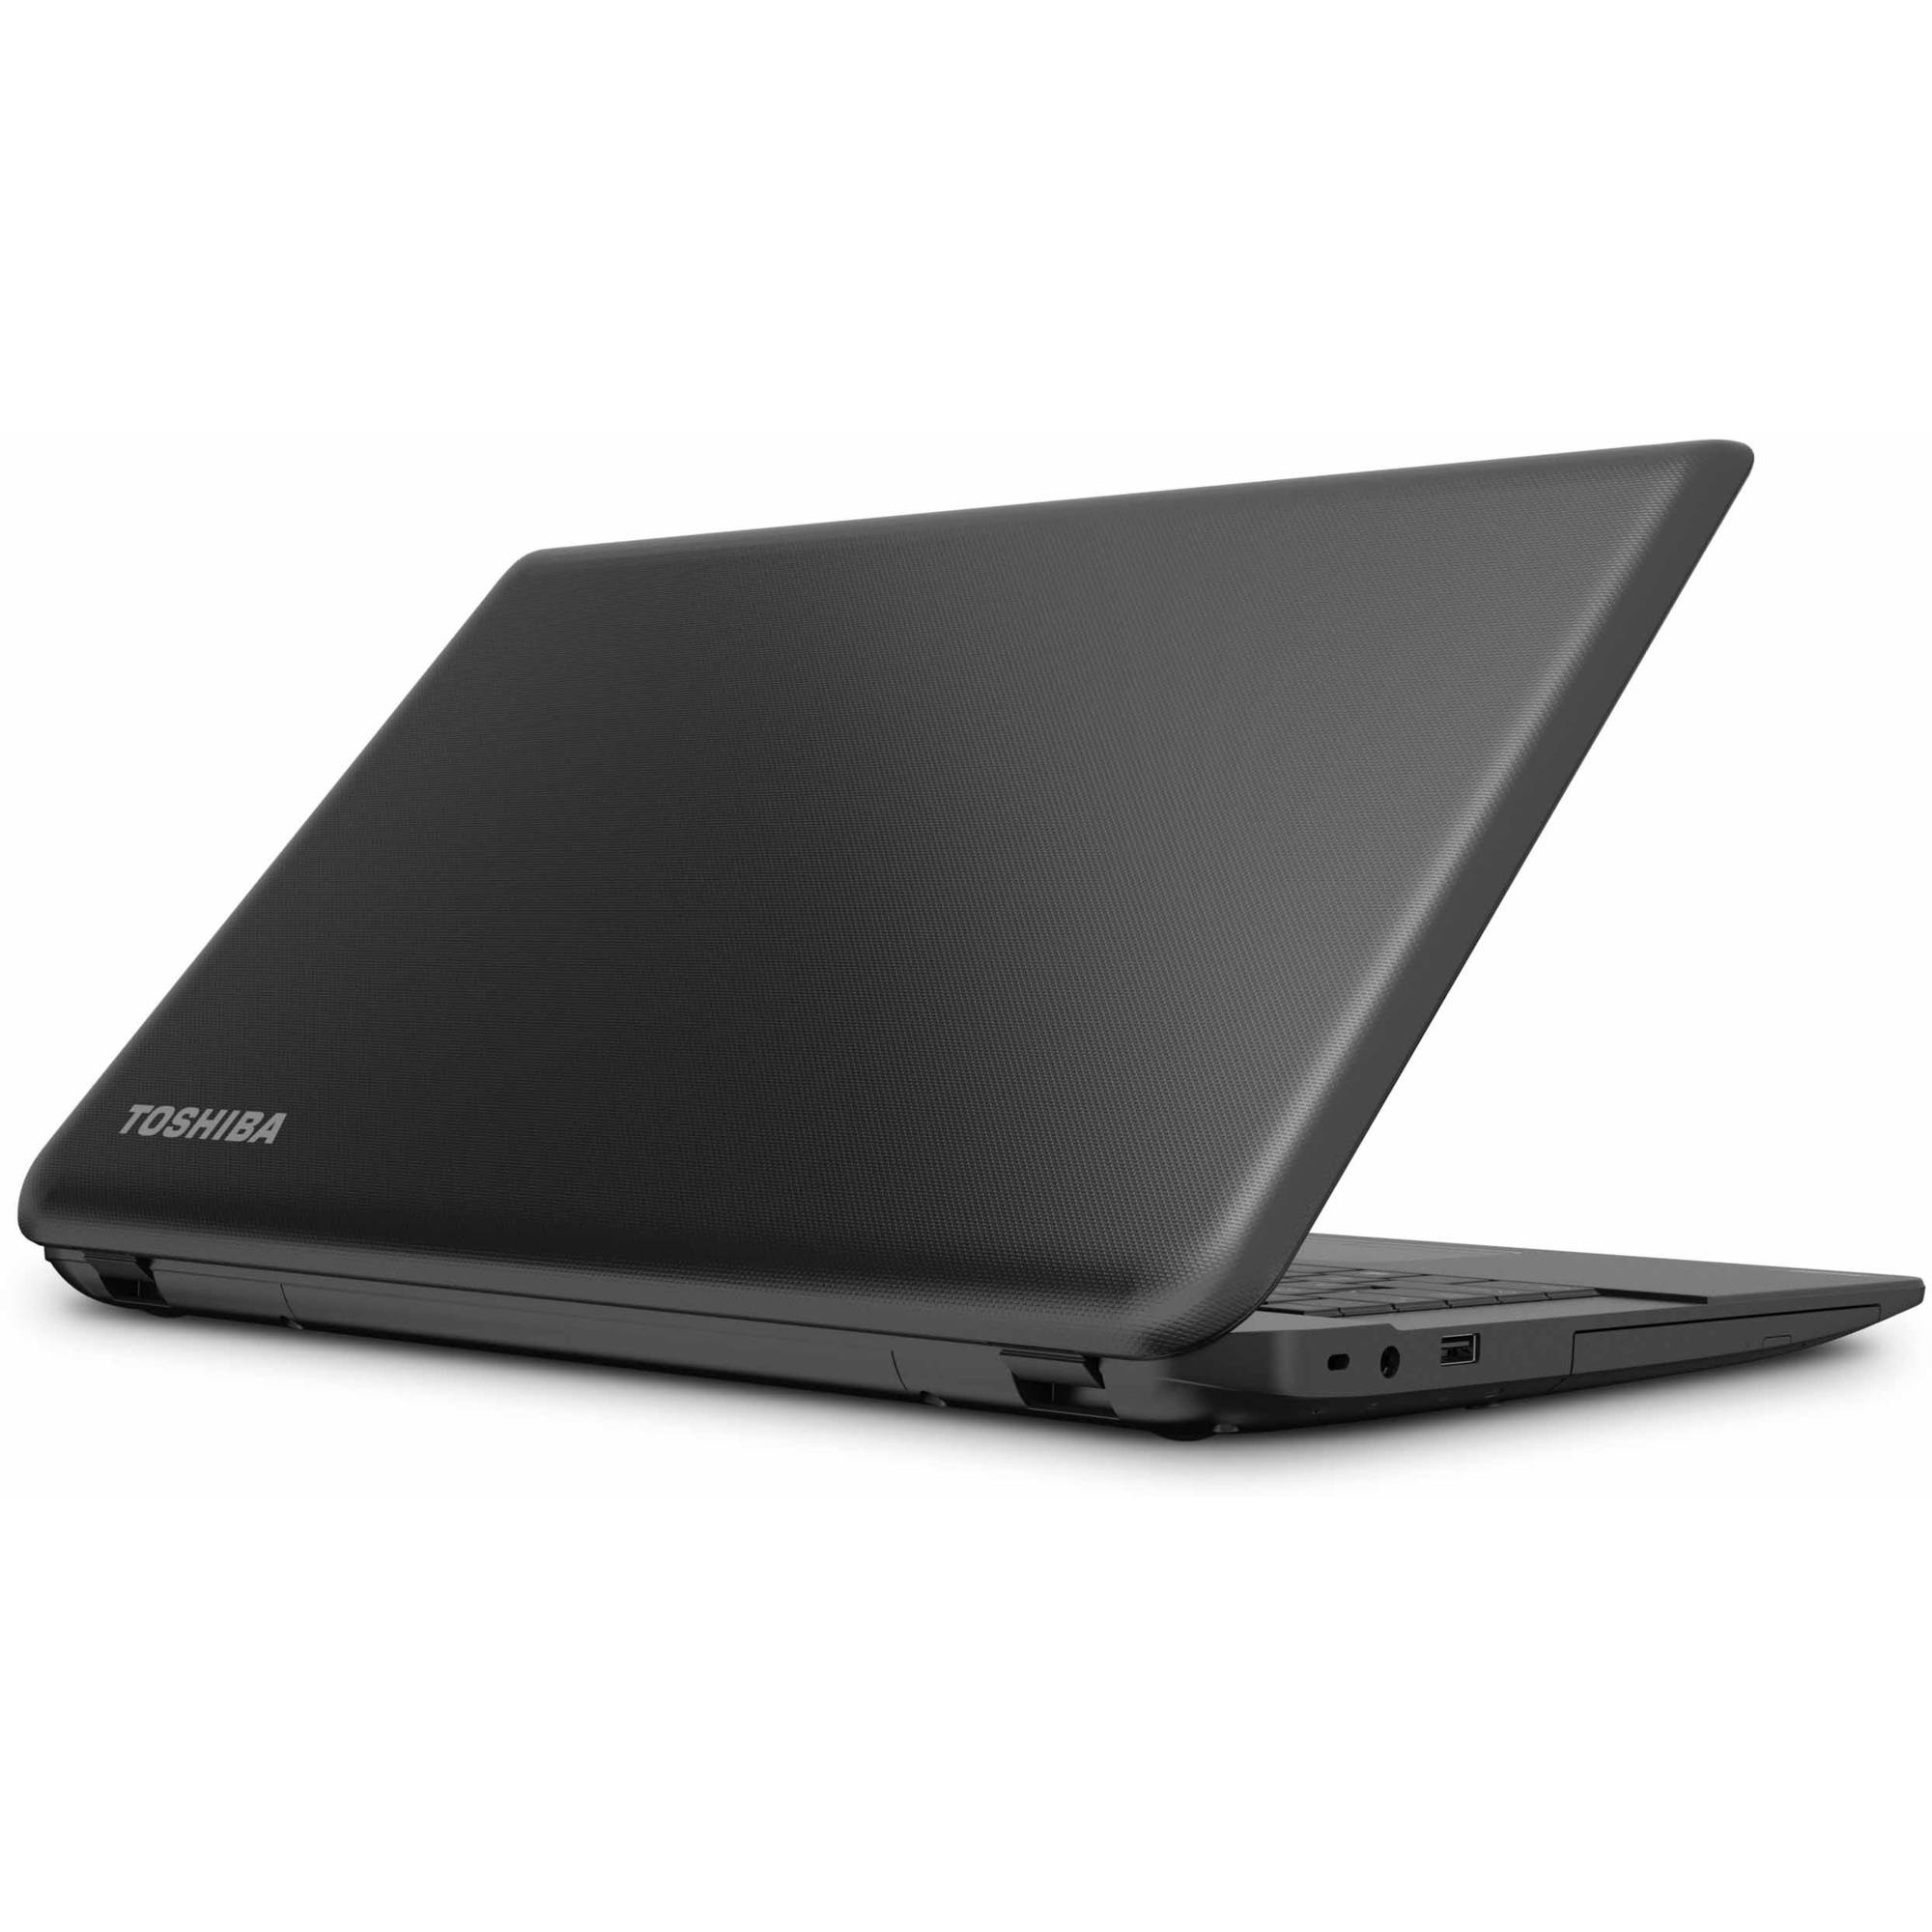 Toshiba Satellite C75D-B7320 - AMD A8 - 6410 / up to 2.4 GHz - Windows 10 Home - Radeon R5 - 6 GB RAM - 750 GB HDD - DVD SuperMulti - 17.3" 1600 x 900 (HD+) - textured resin in jet black - image 5 of 12